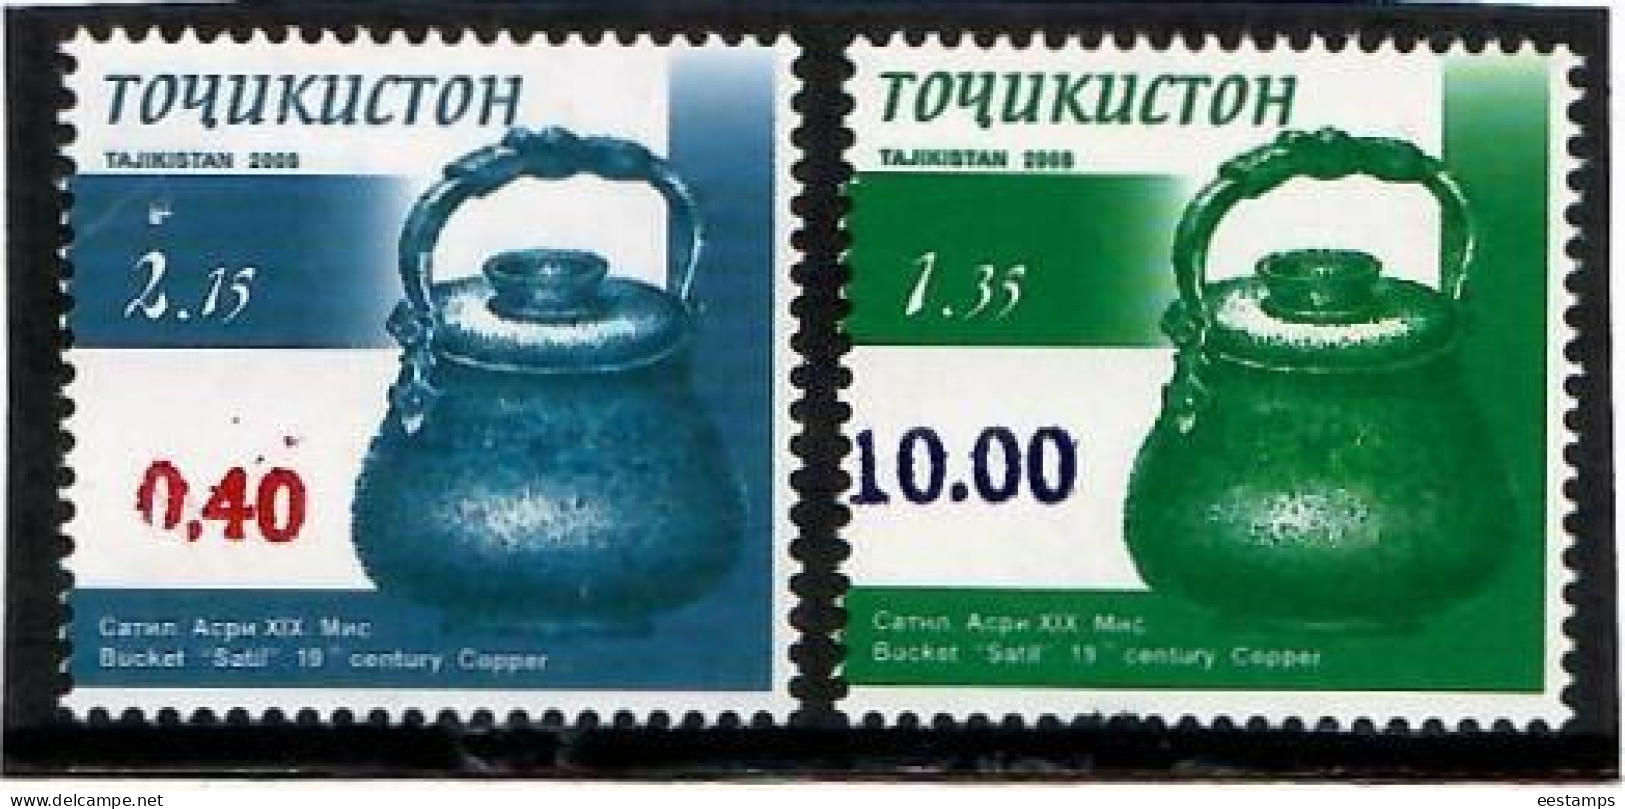 Tajikistan 2021 . Ovpt 0.40, 10.00 On Cooking Copper Of 2008 (Trial Stamps) . 2 - Tayikistán